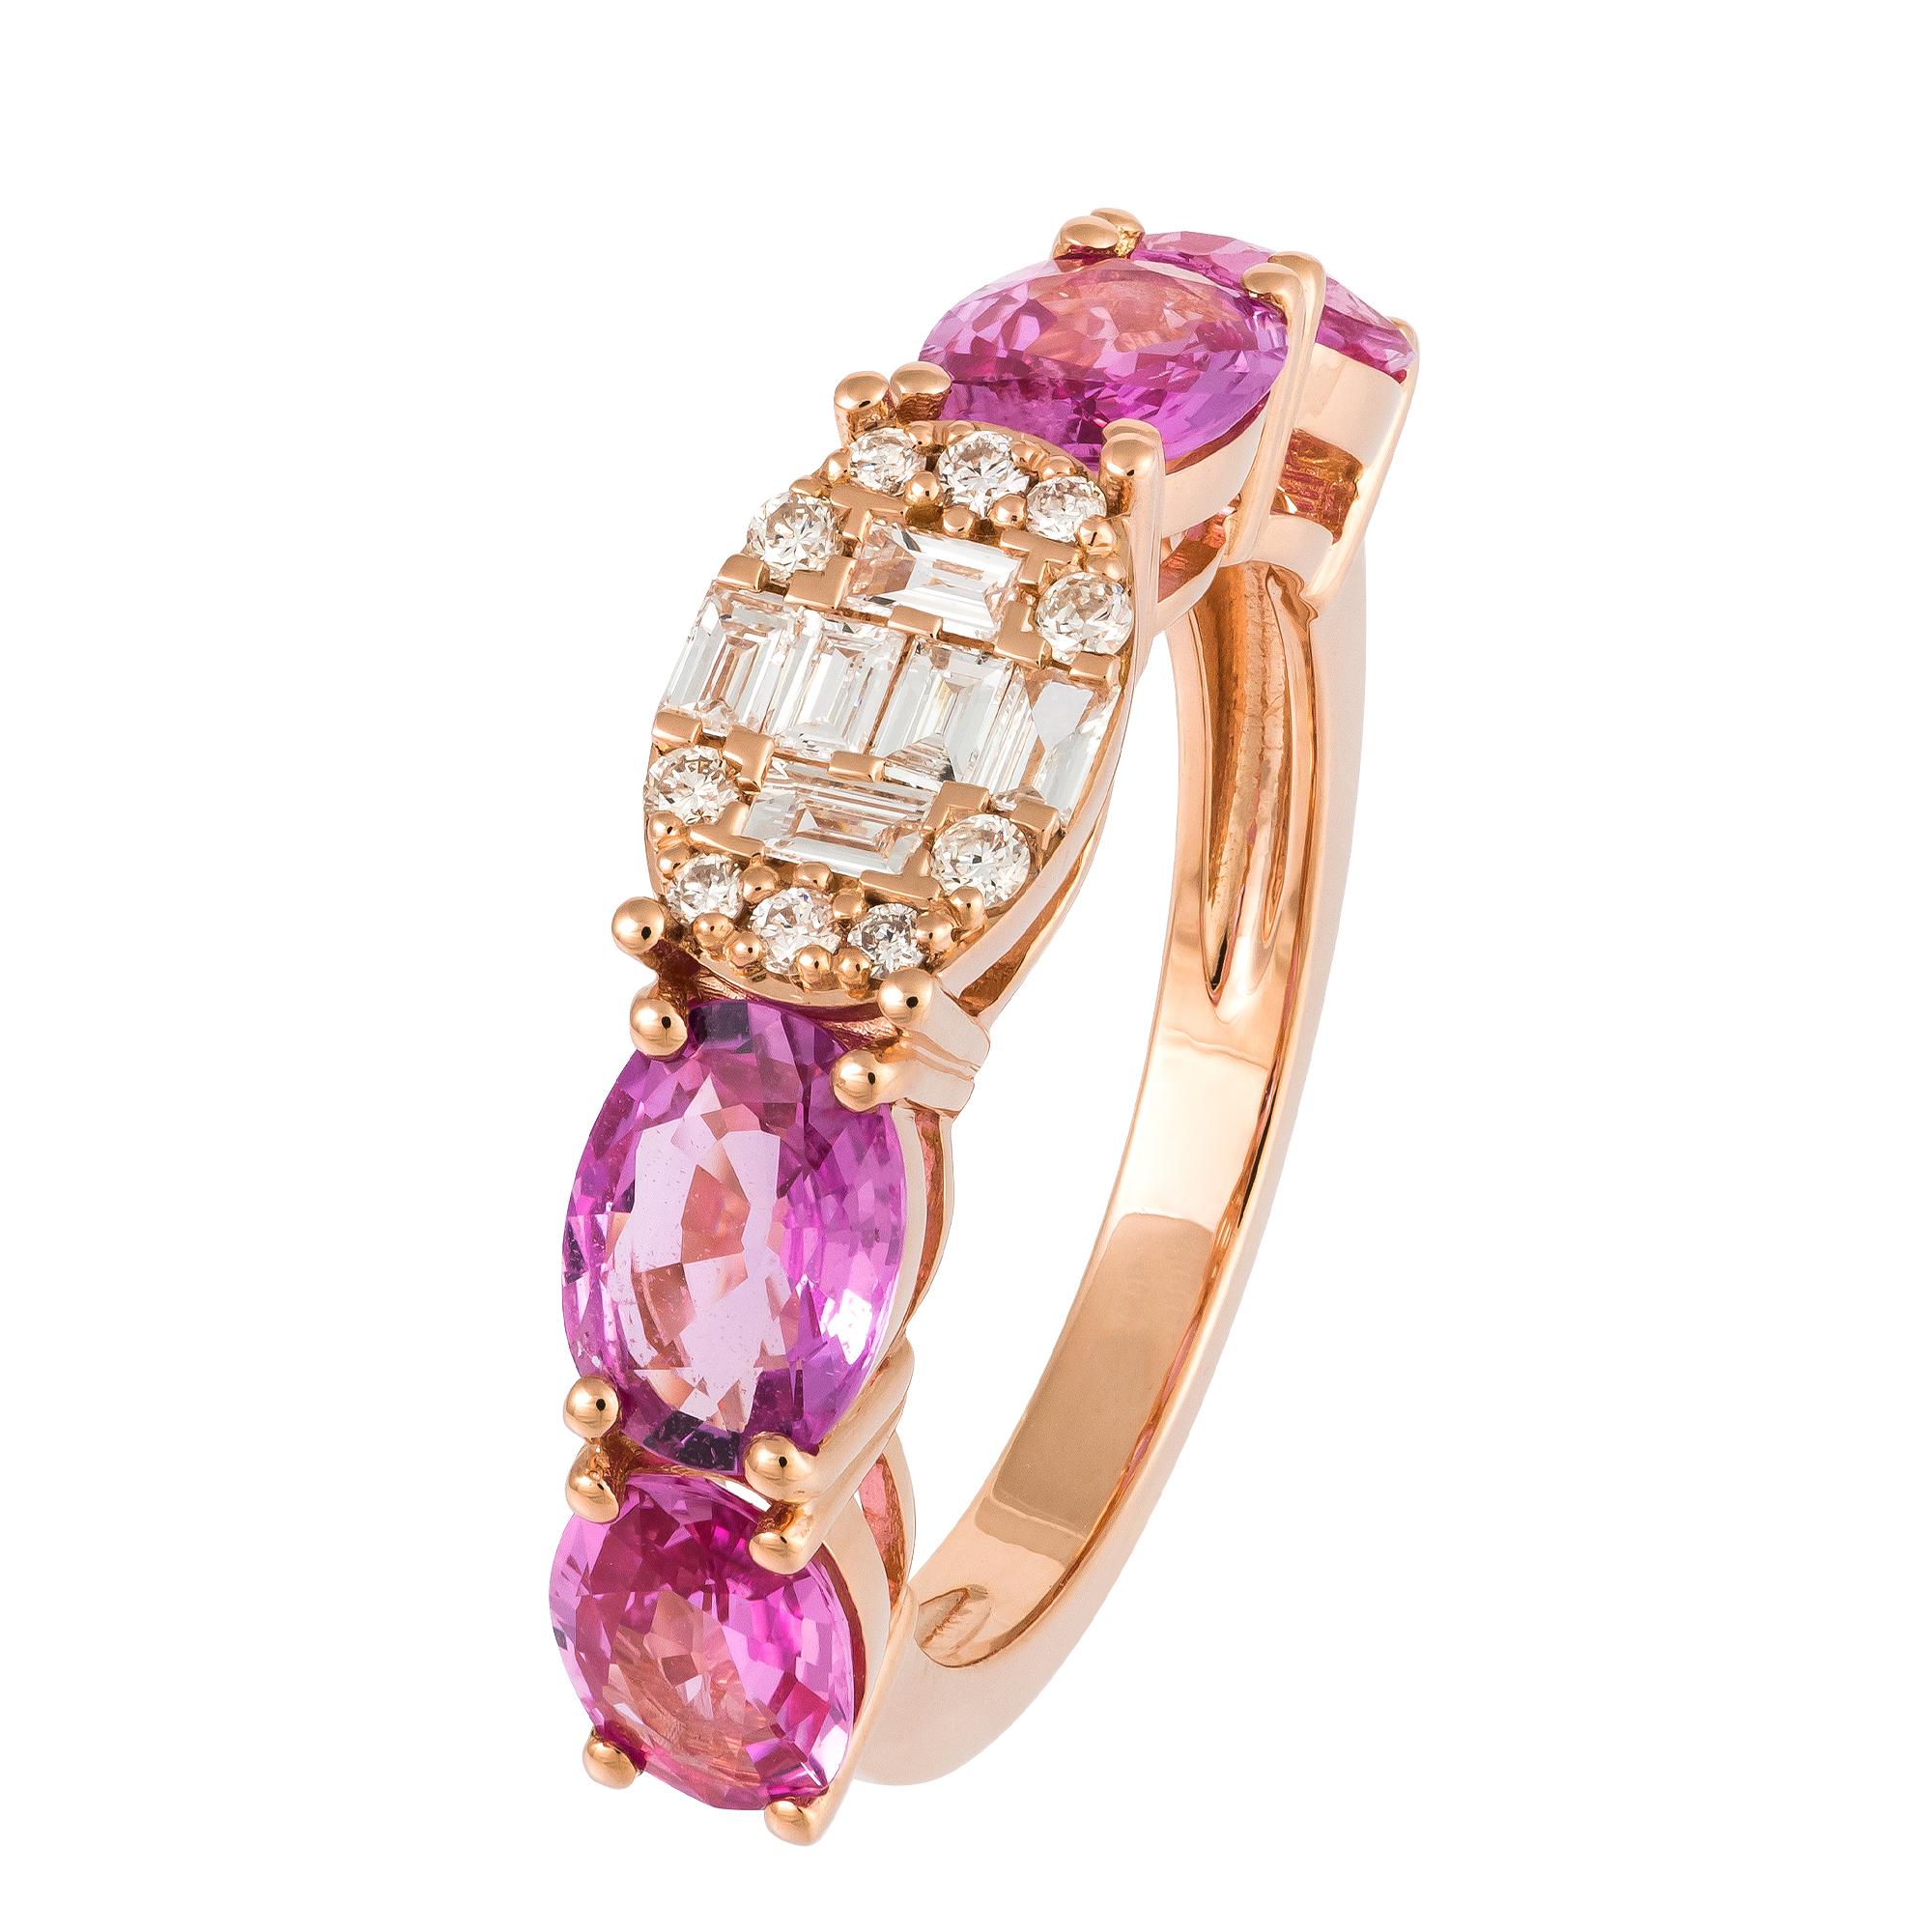 For Sale:  Breathtaking Pink 18K Gold Pink Sapphire Diamond Ring For Her 3